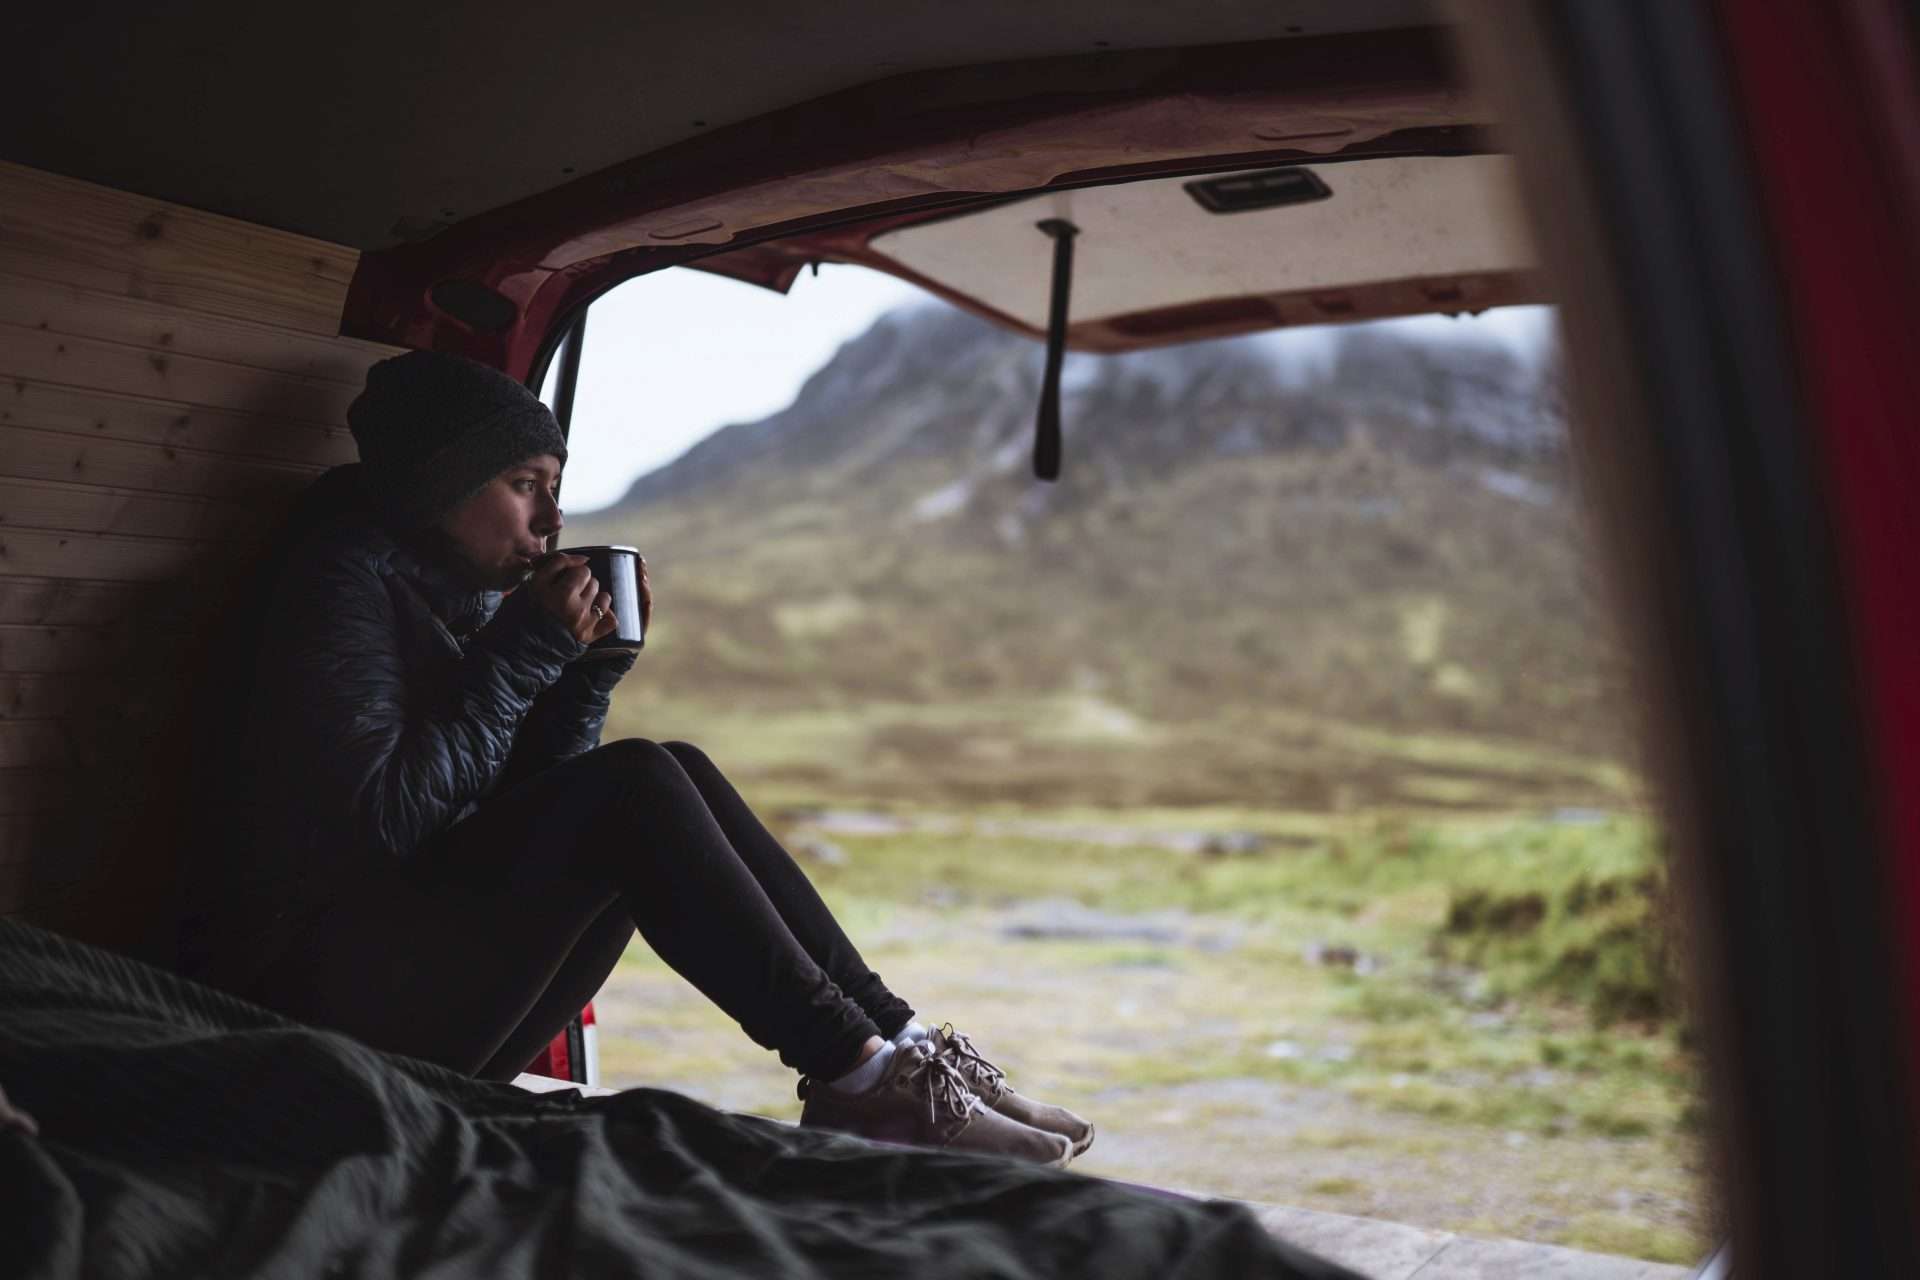 Woman drinking coffee while camping in camper van